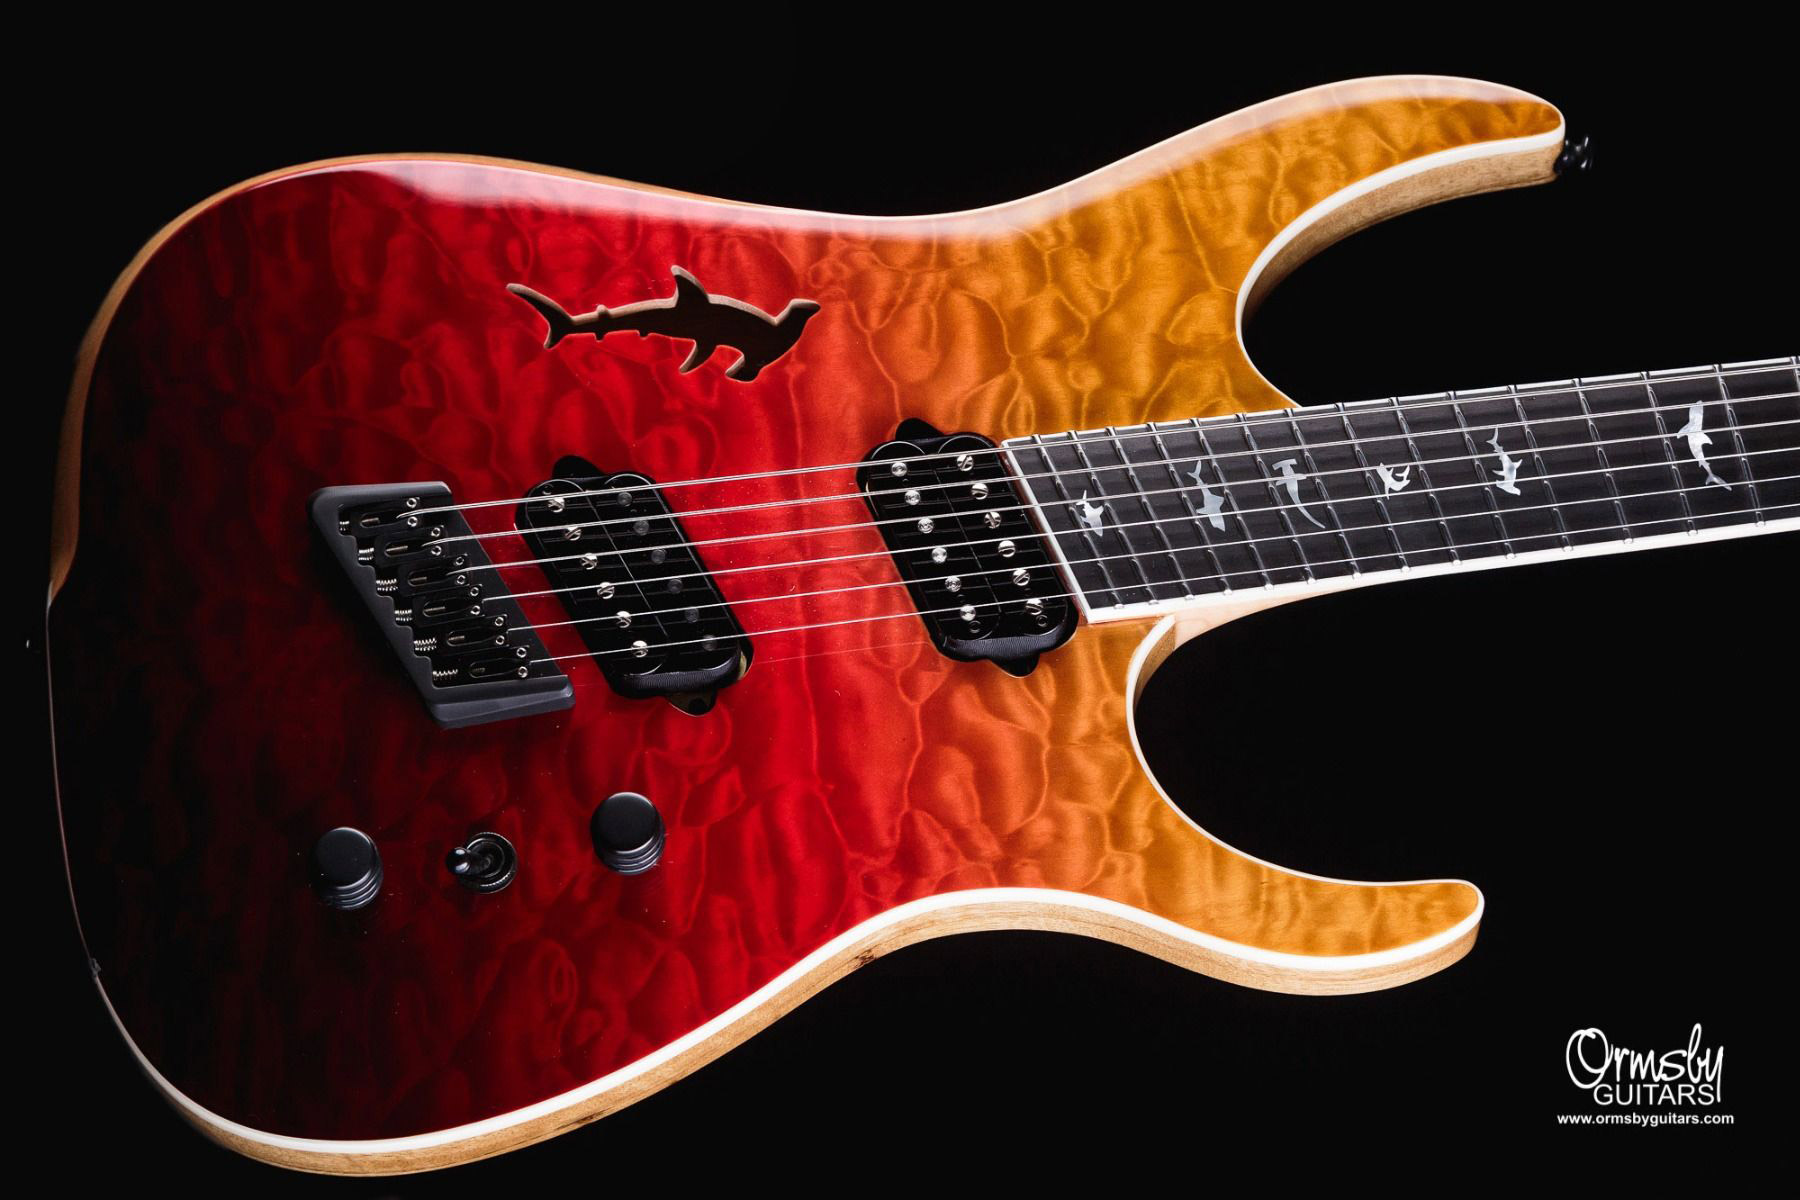 Ormsby Hype Gtr Shark 6c Multiscale 2h Ht Eb - Sunset - Multi-Scale Guitar - Variation 2